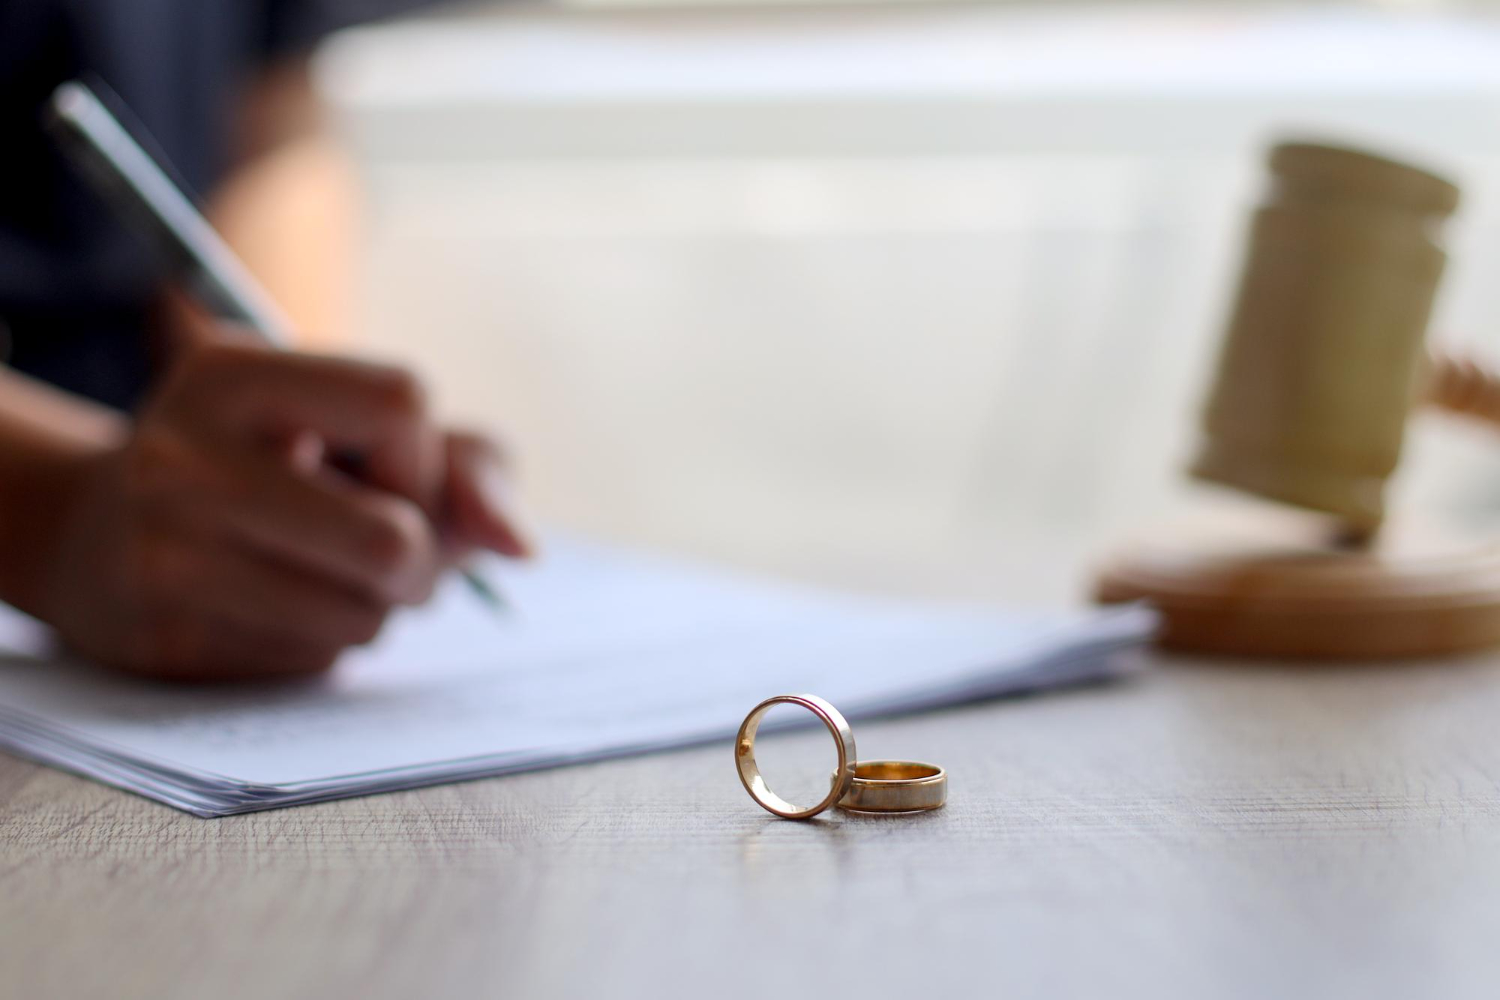 List of documents for marriage or divorce with a foreigner - Image